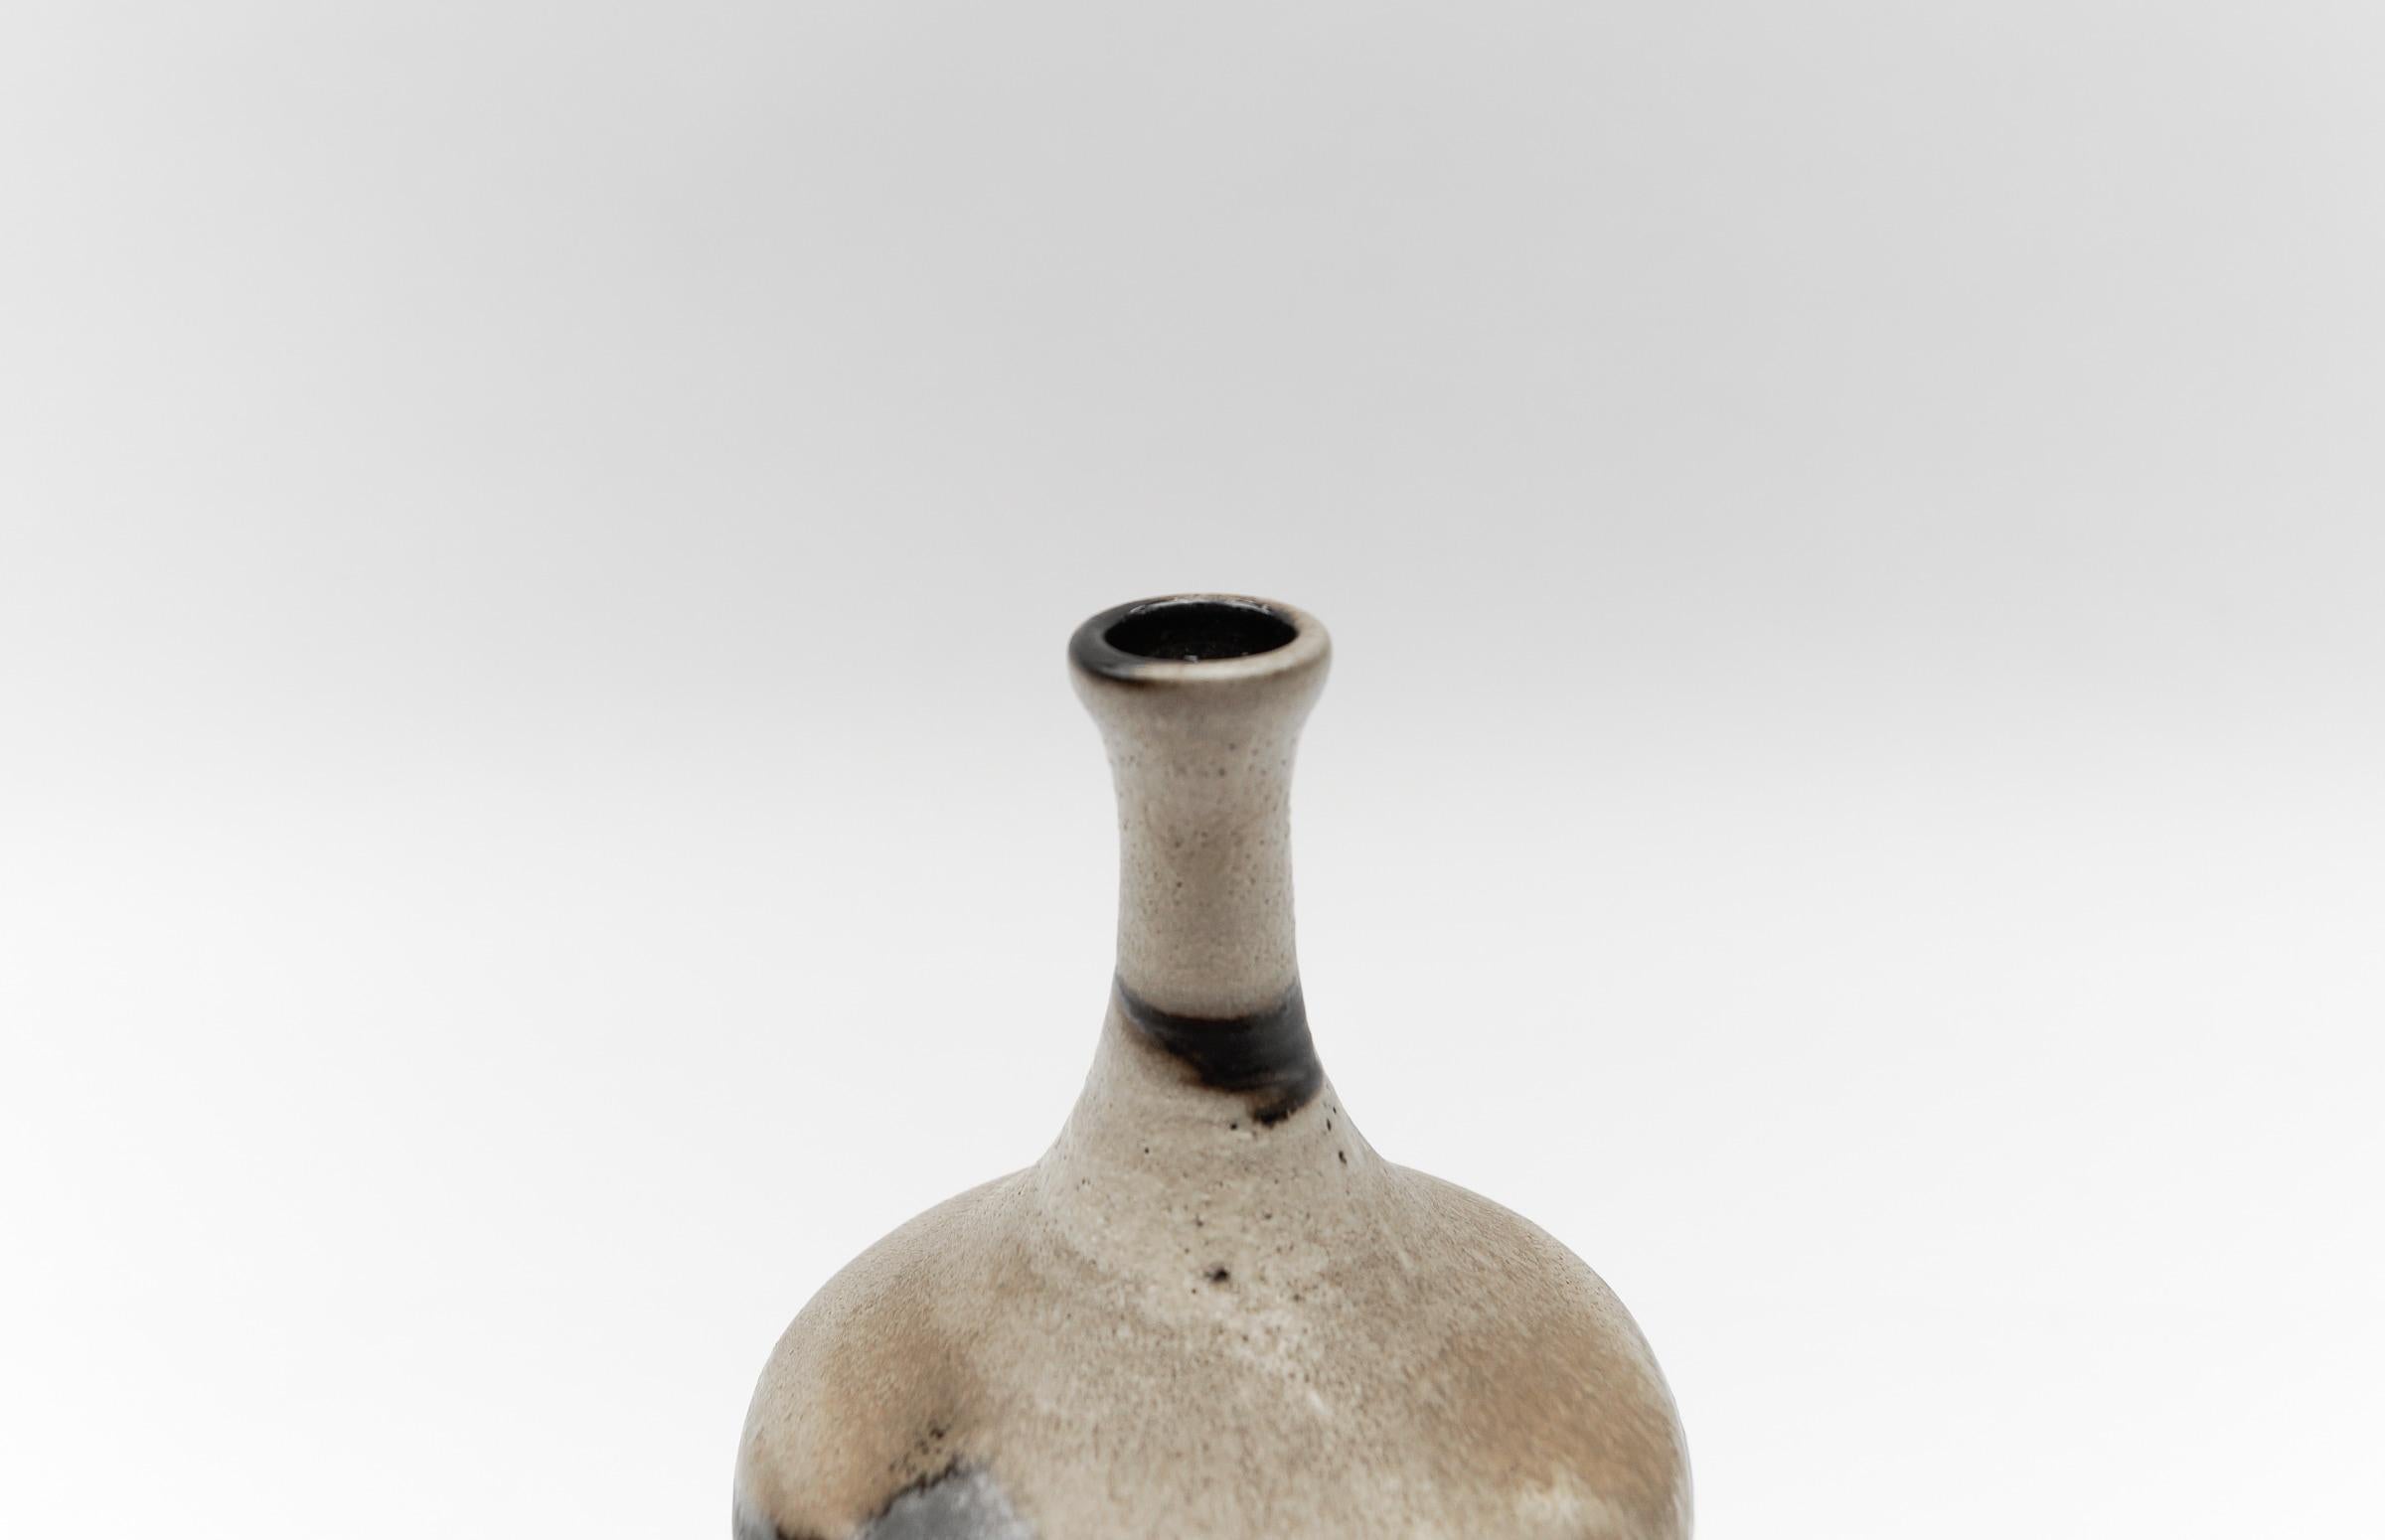 Mid-20th Century Studio Ceramic Vase by Elly Kuch for Wilhelm & Elly KUCH, 1960s, Germany For Sale